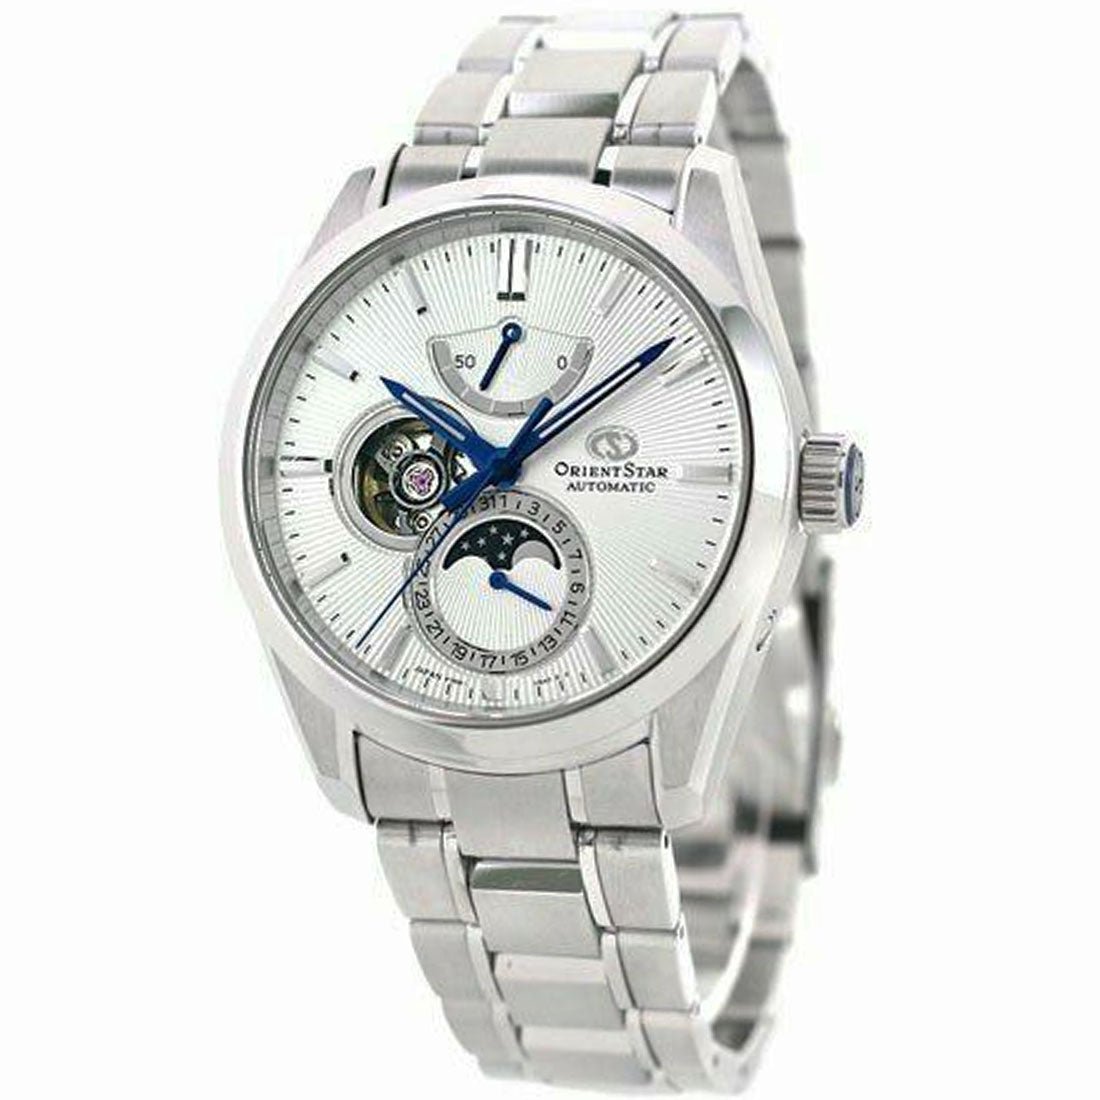 Orient Star Moon Phase White Dial Classic Watch RE-AY0002S RE-AY0002S00B -Orient